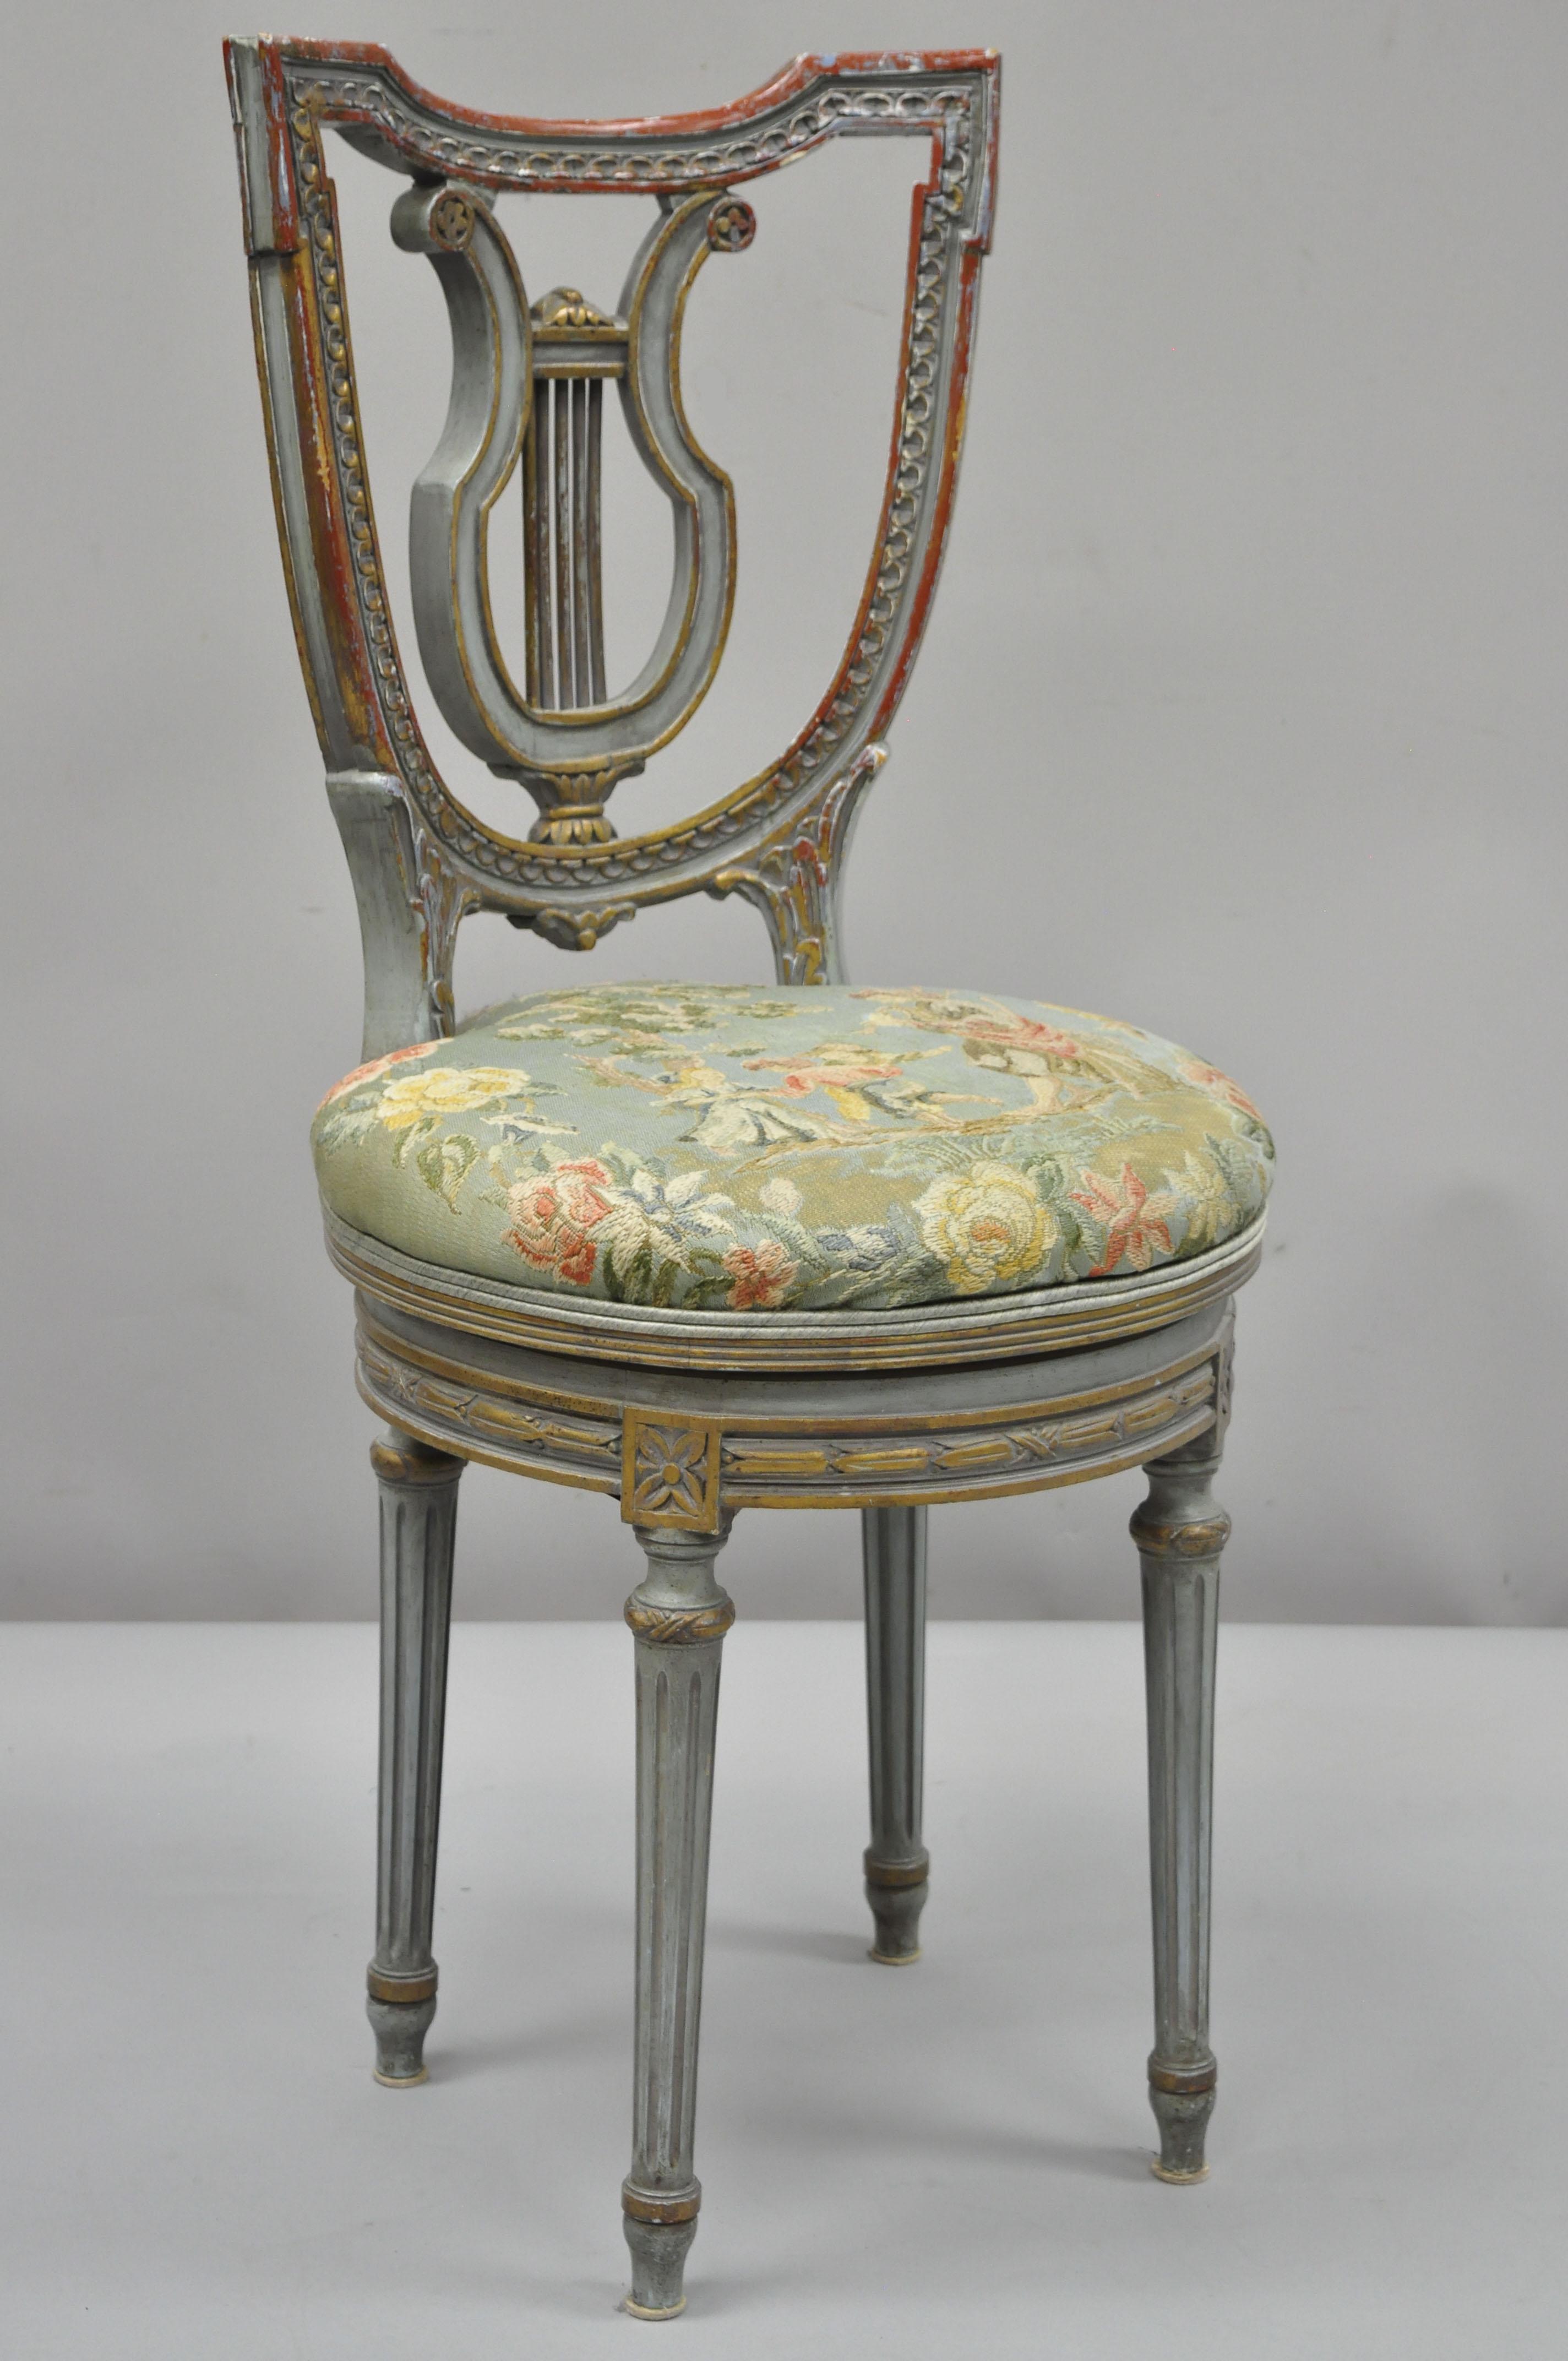 Vintage French Louis XVI style blue and red painted harp lyre back swivel accent vanity chair. Item features round swivel seat with figural tapestry upholstery, finely carved details, blue and red parcel gilt, distress painted finish, carved 